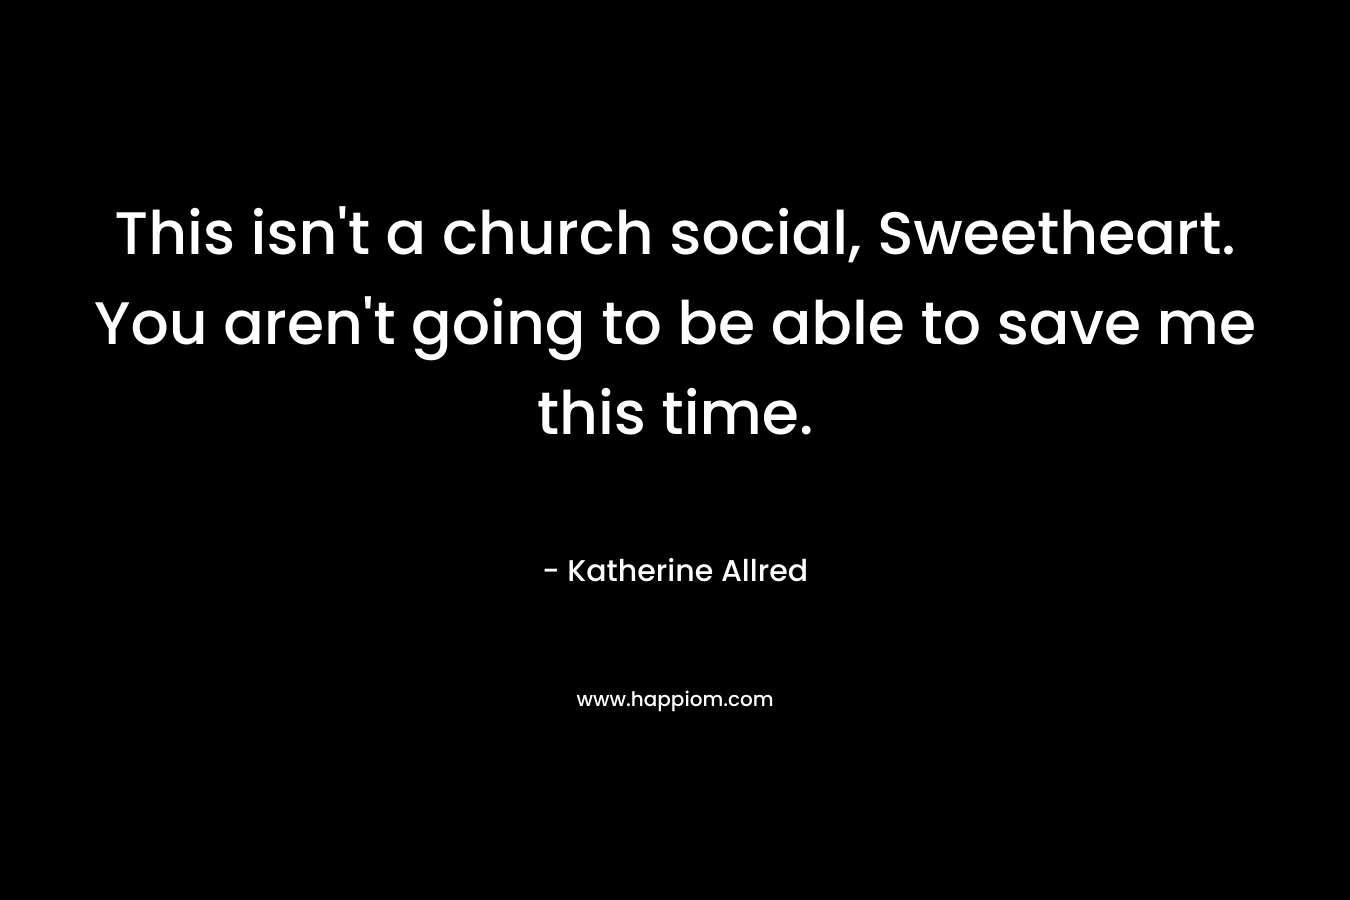 This isn’t a church social, Sweetheart. You aren’t going to be able to save me this time. – Katherine Allred